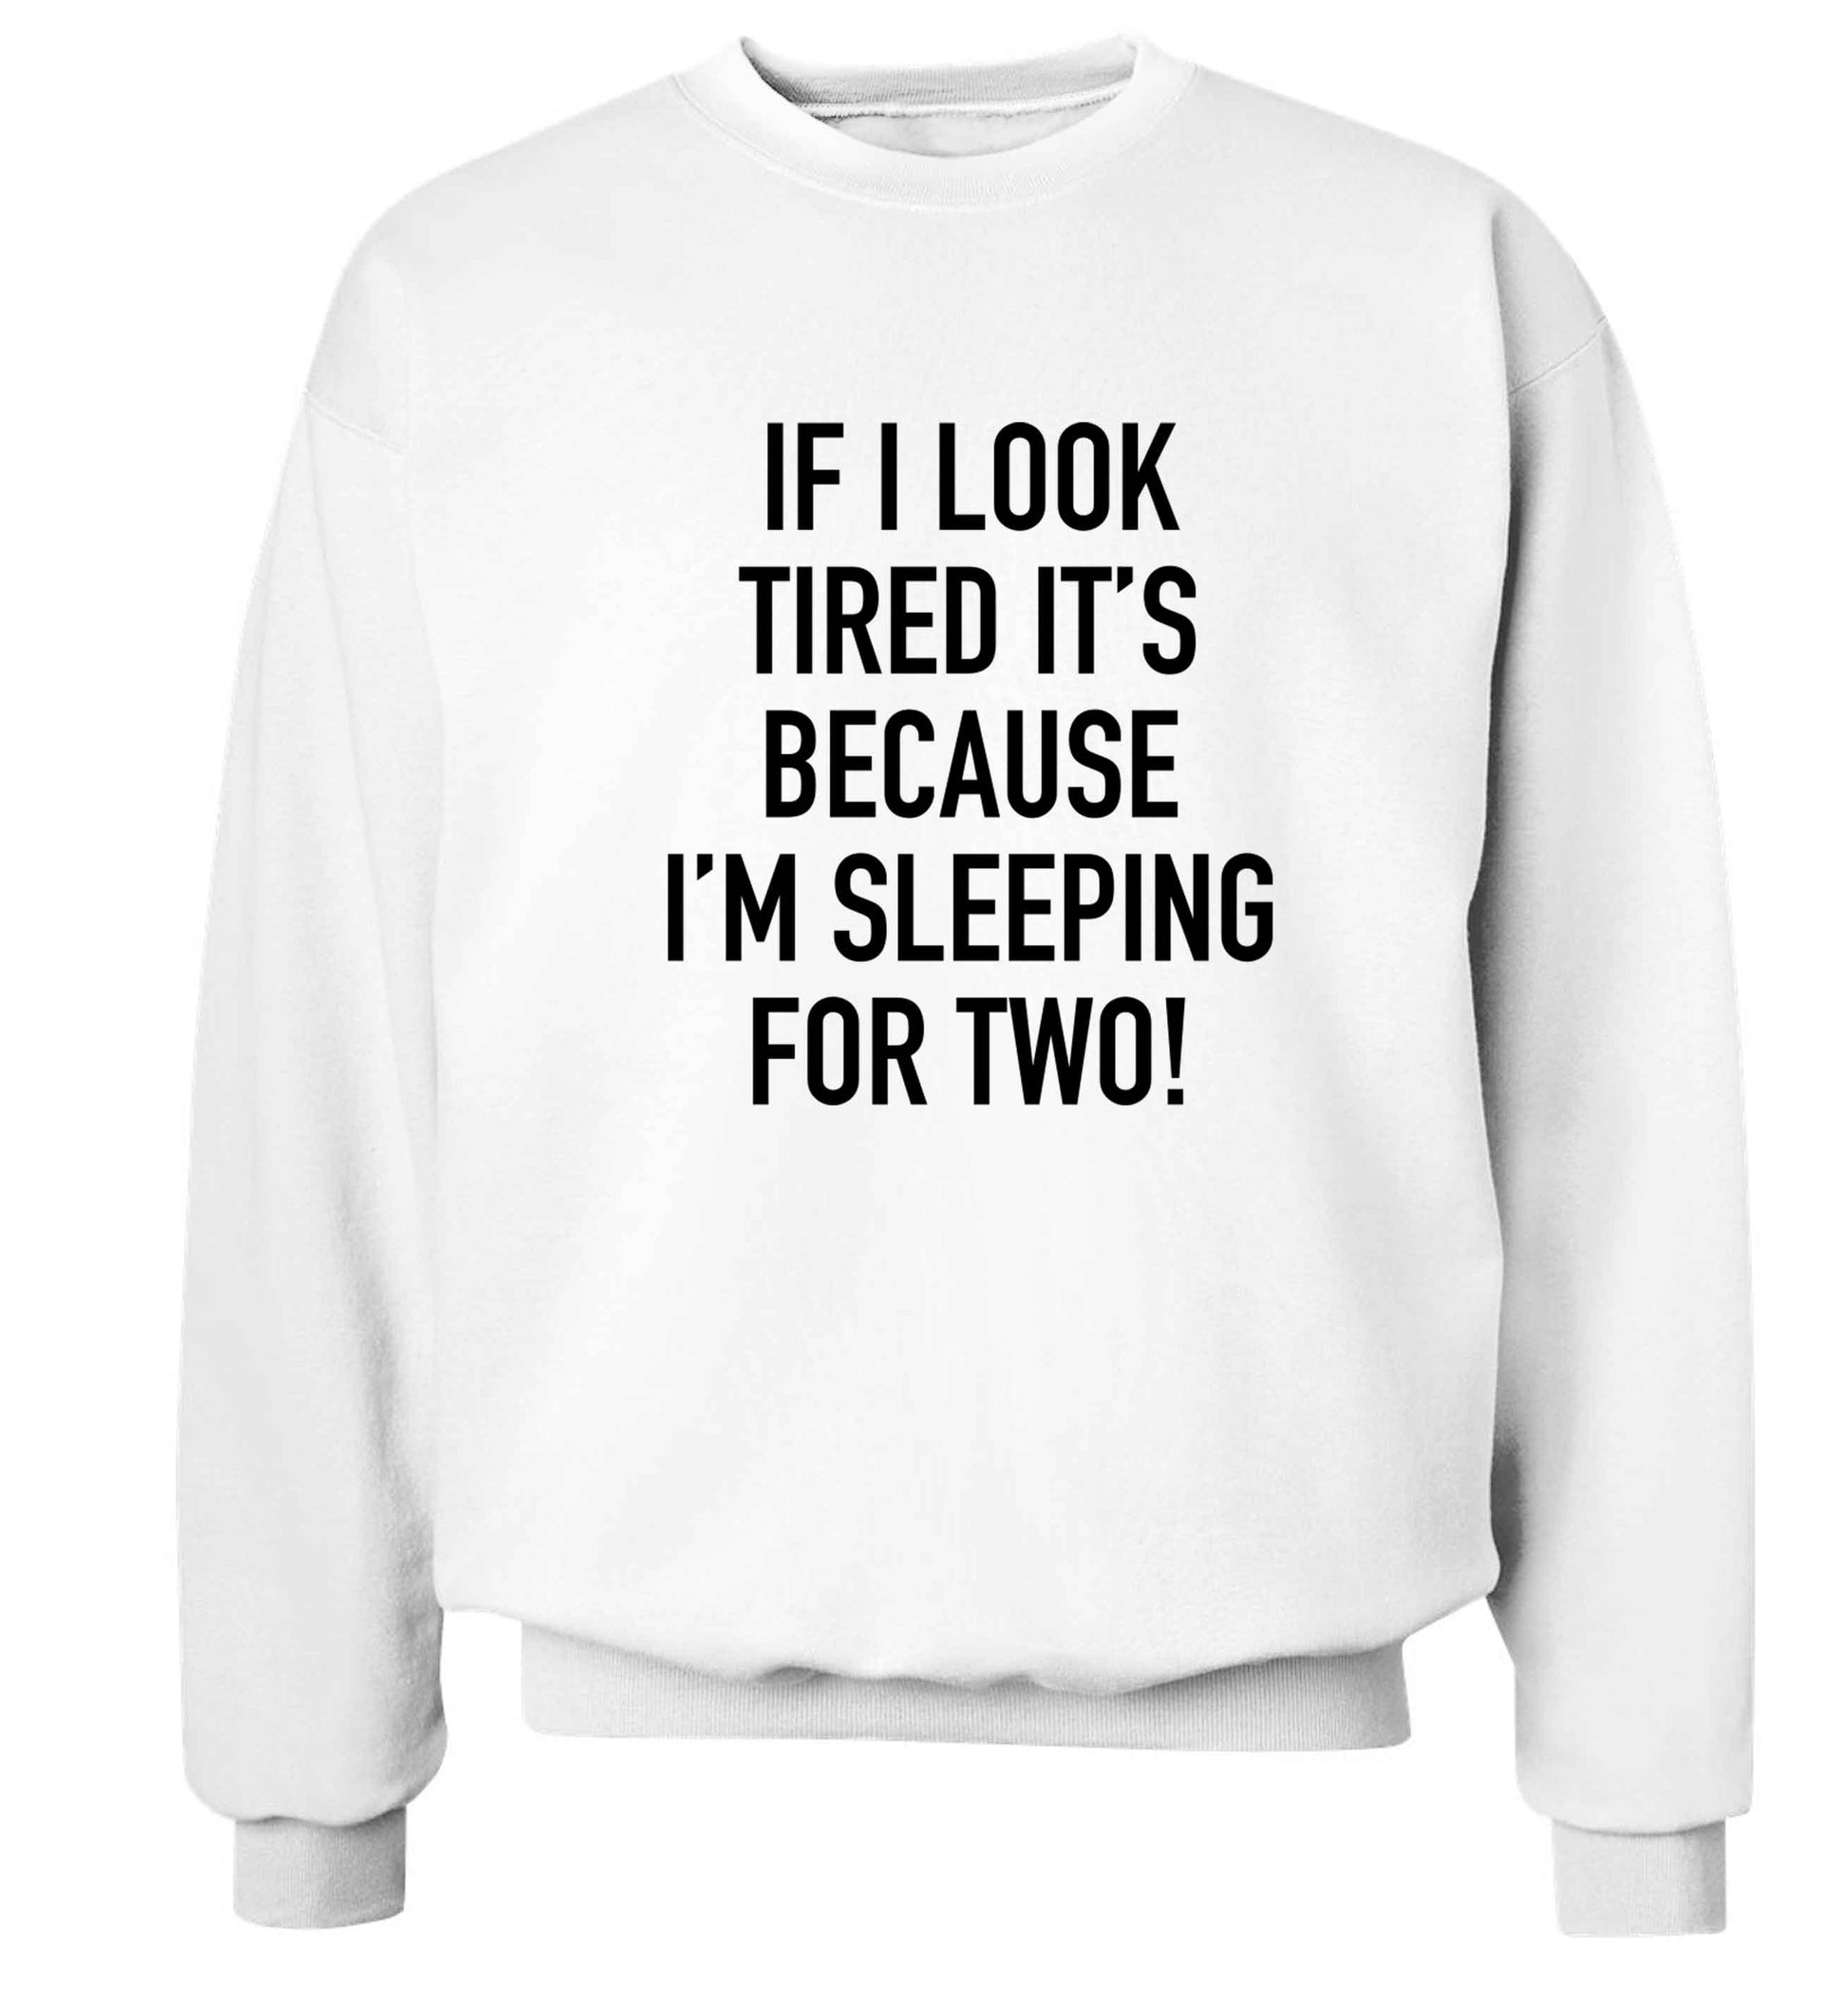 If I look tired it's because I'm sleeping for two Adult's unisex white Sweater 2XL